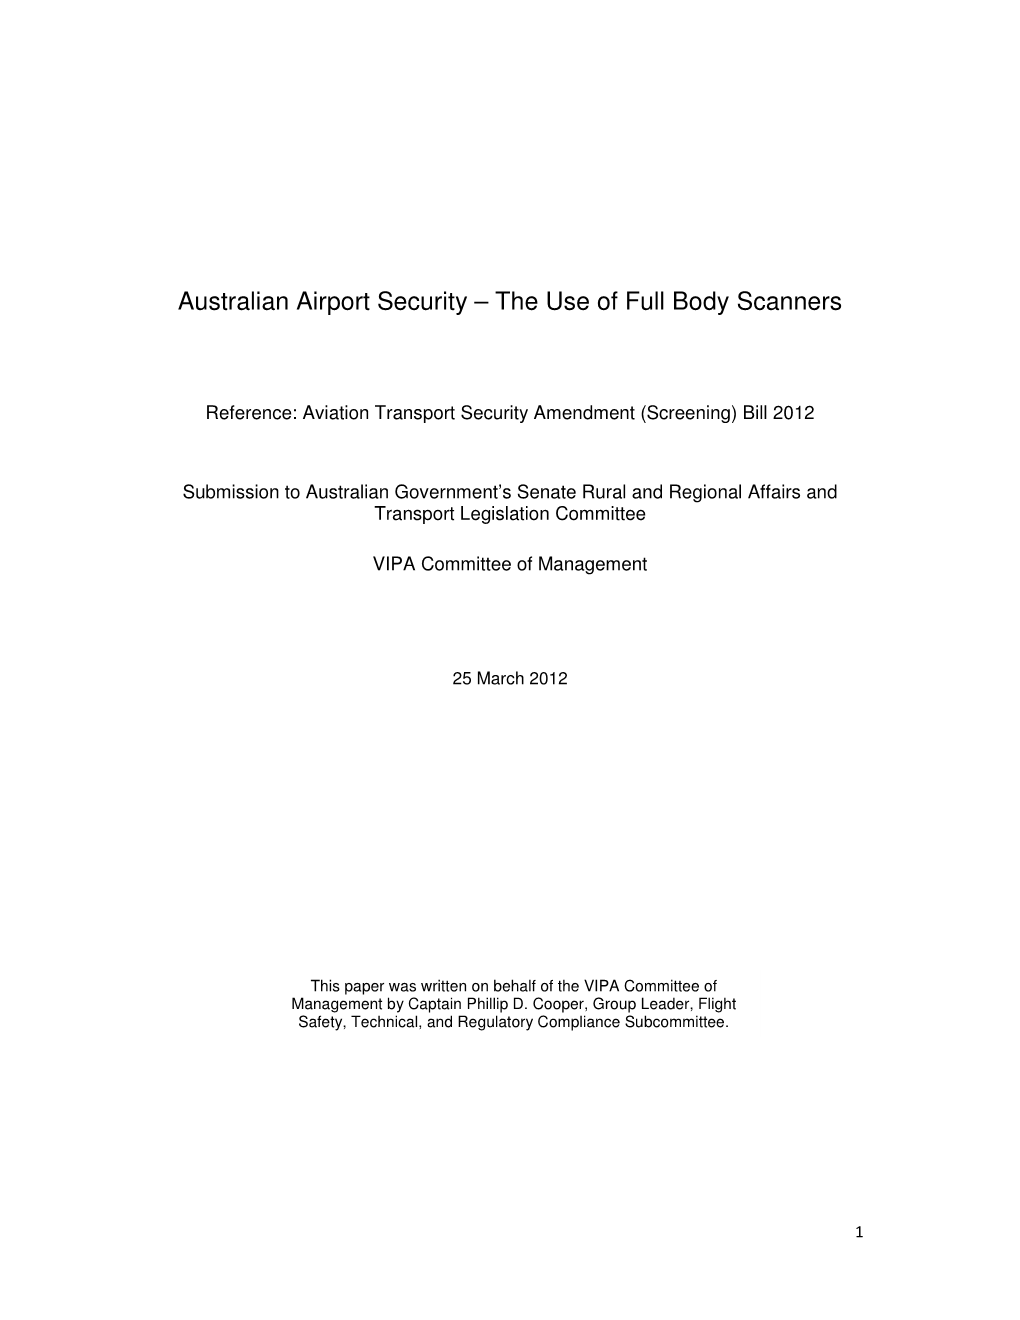 Australian Airport Security – the Use of Full Body Scanners